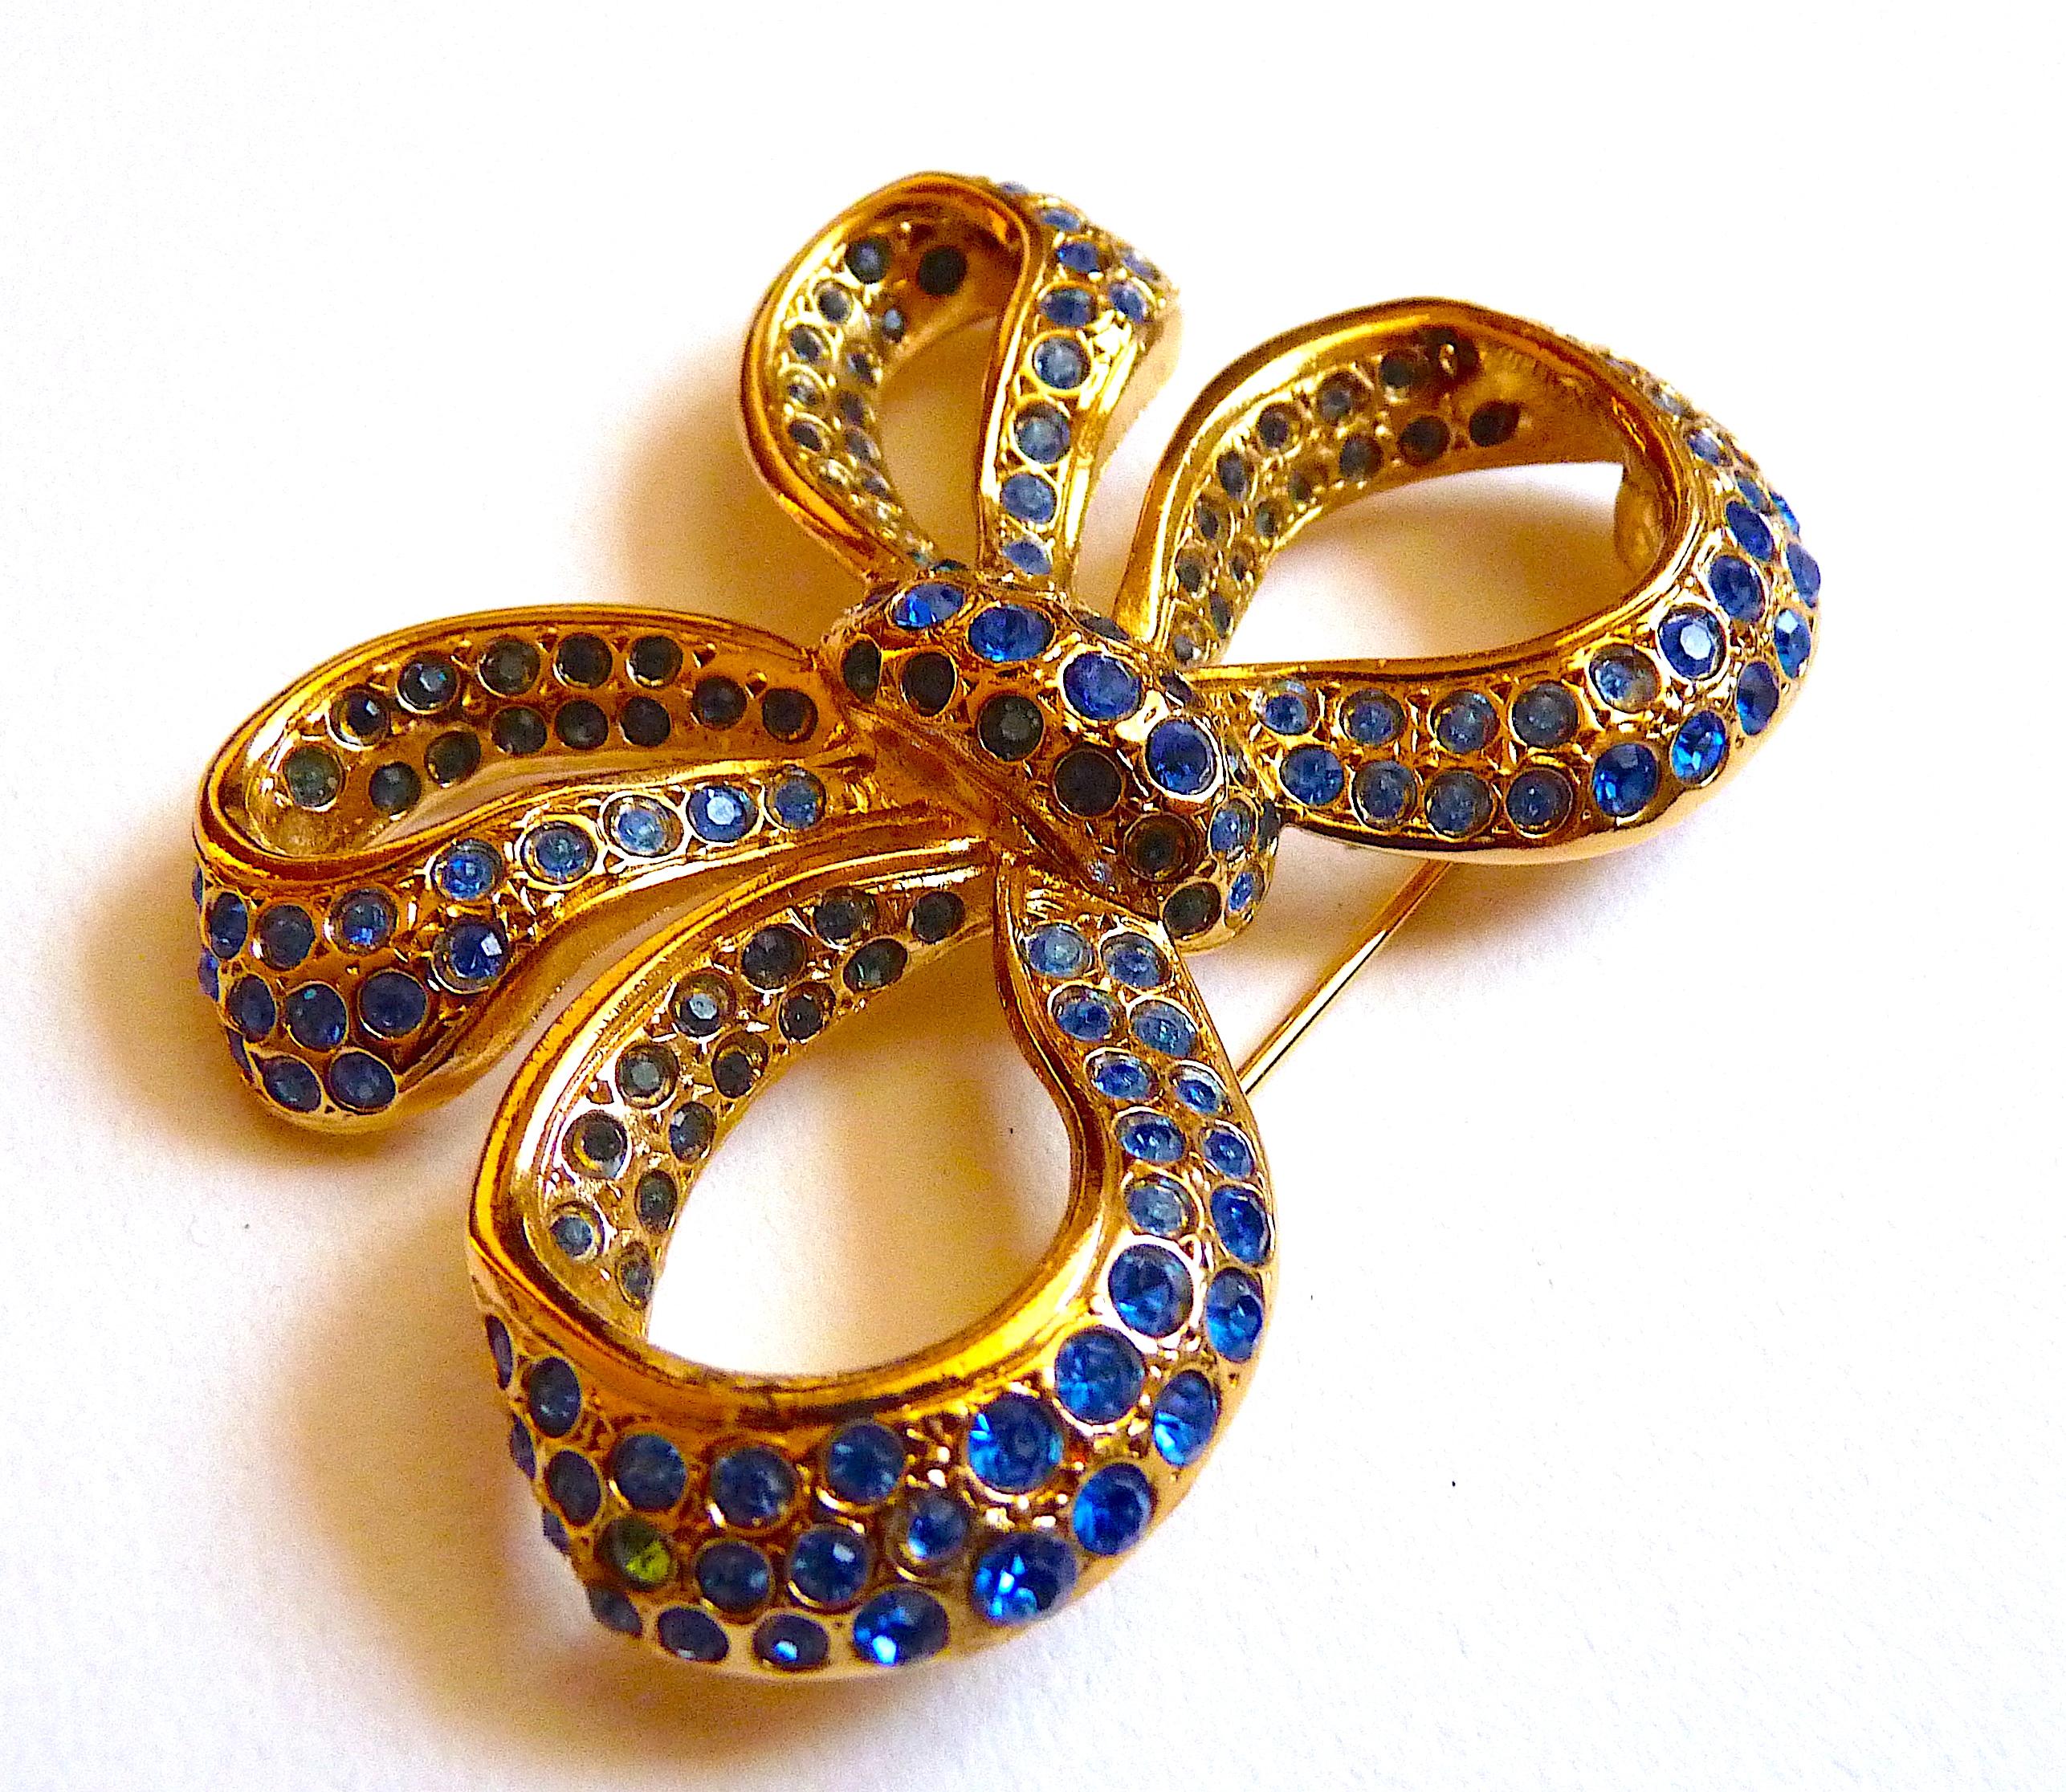 YSL Gilt Metal and Blue Crystal Stones Bow Brooch, Vintage 1980s For Sale 4